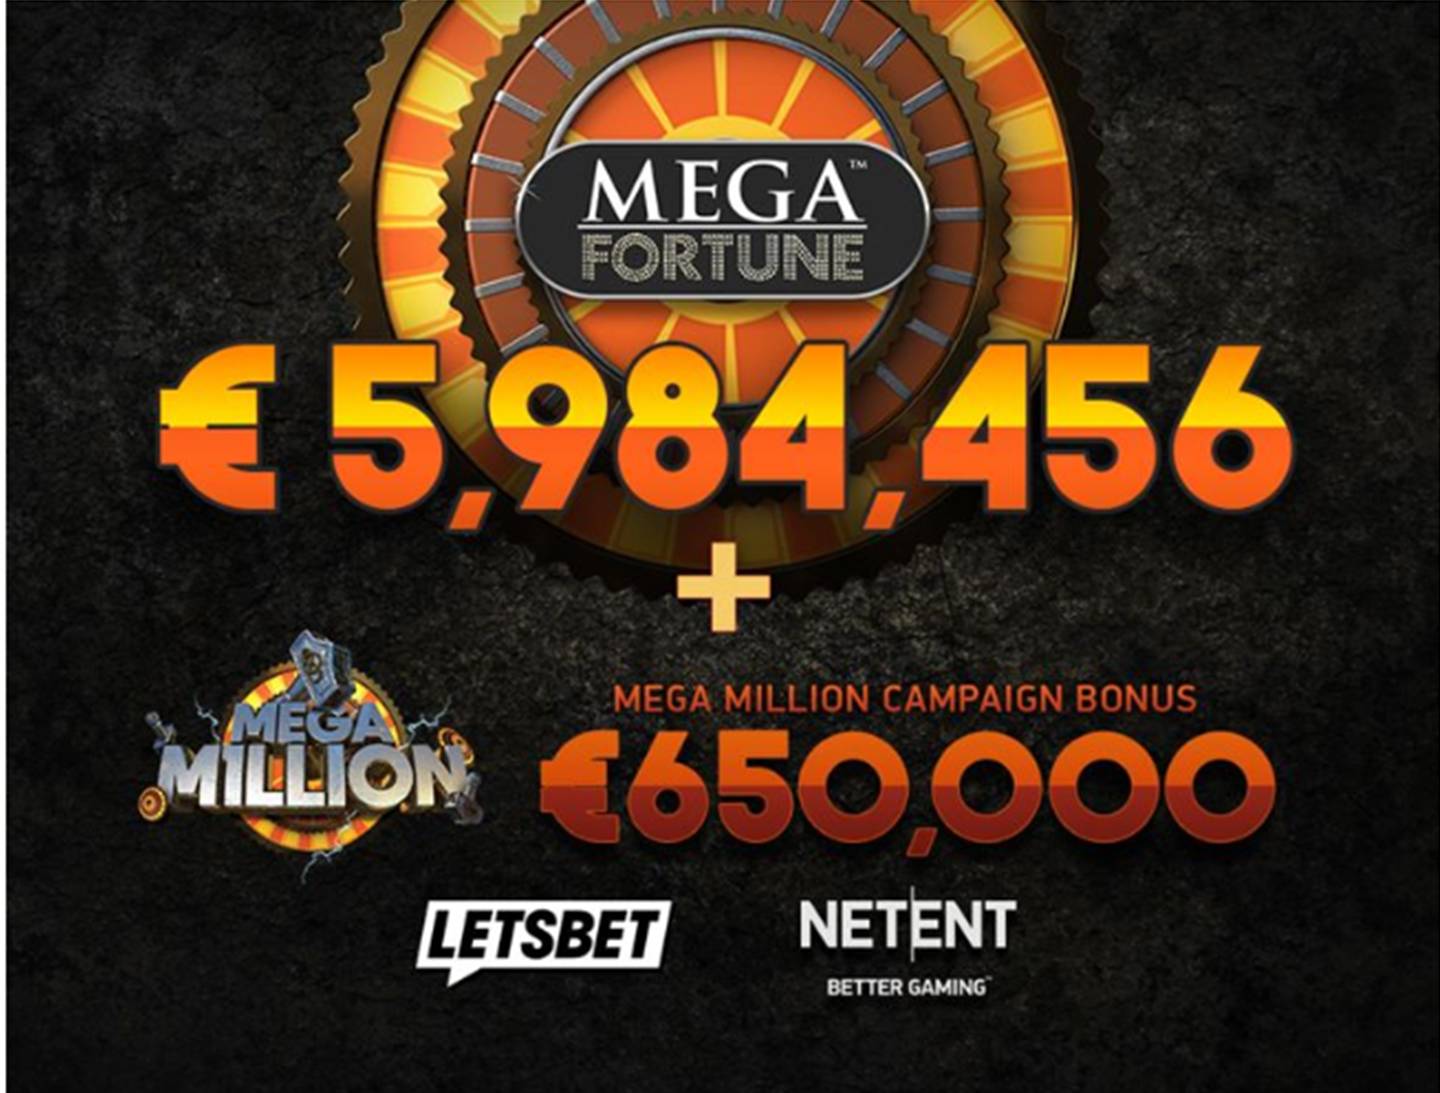 Yet Another Hatrick Of €6.63m From NetEnt's Mega Fortune Campaign